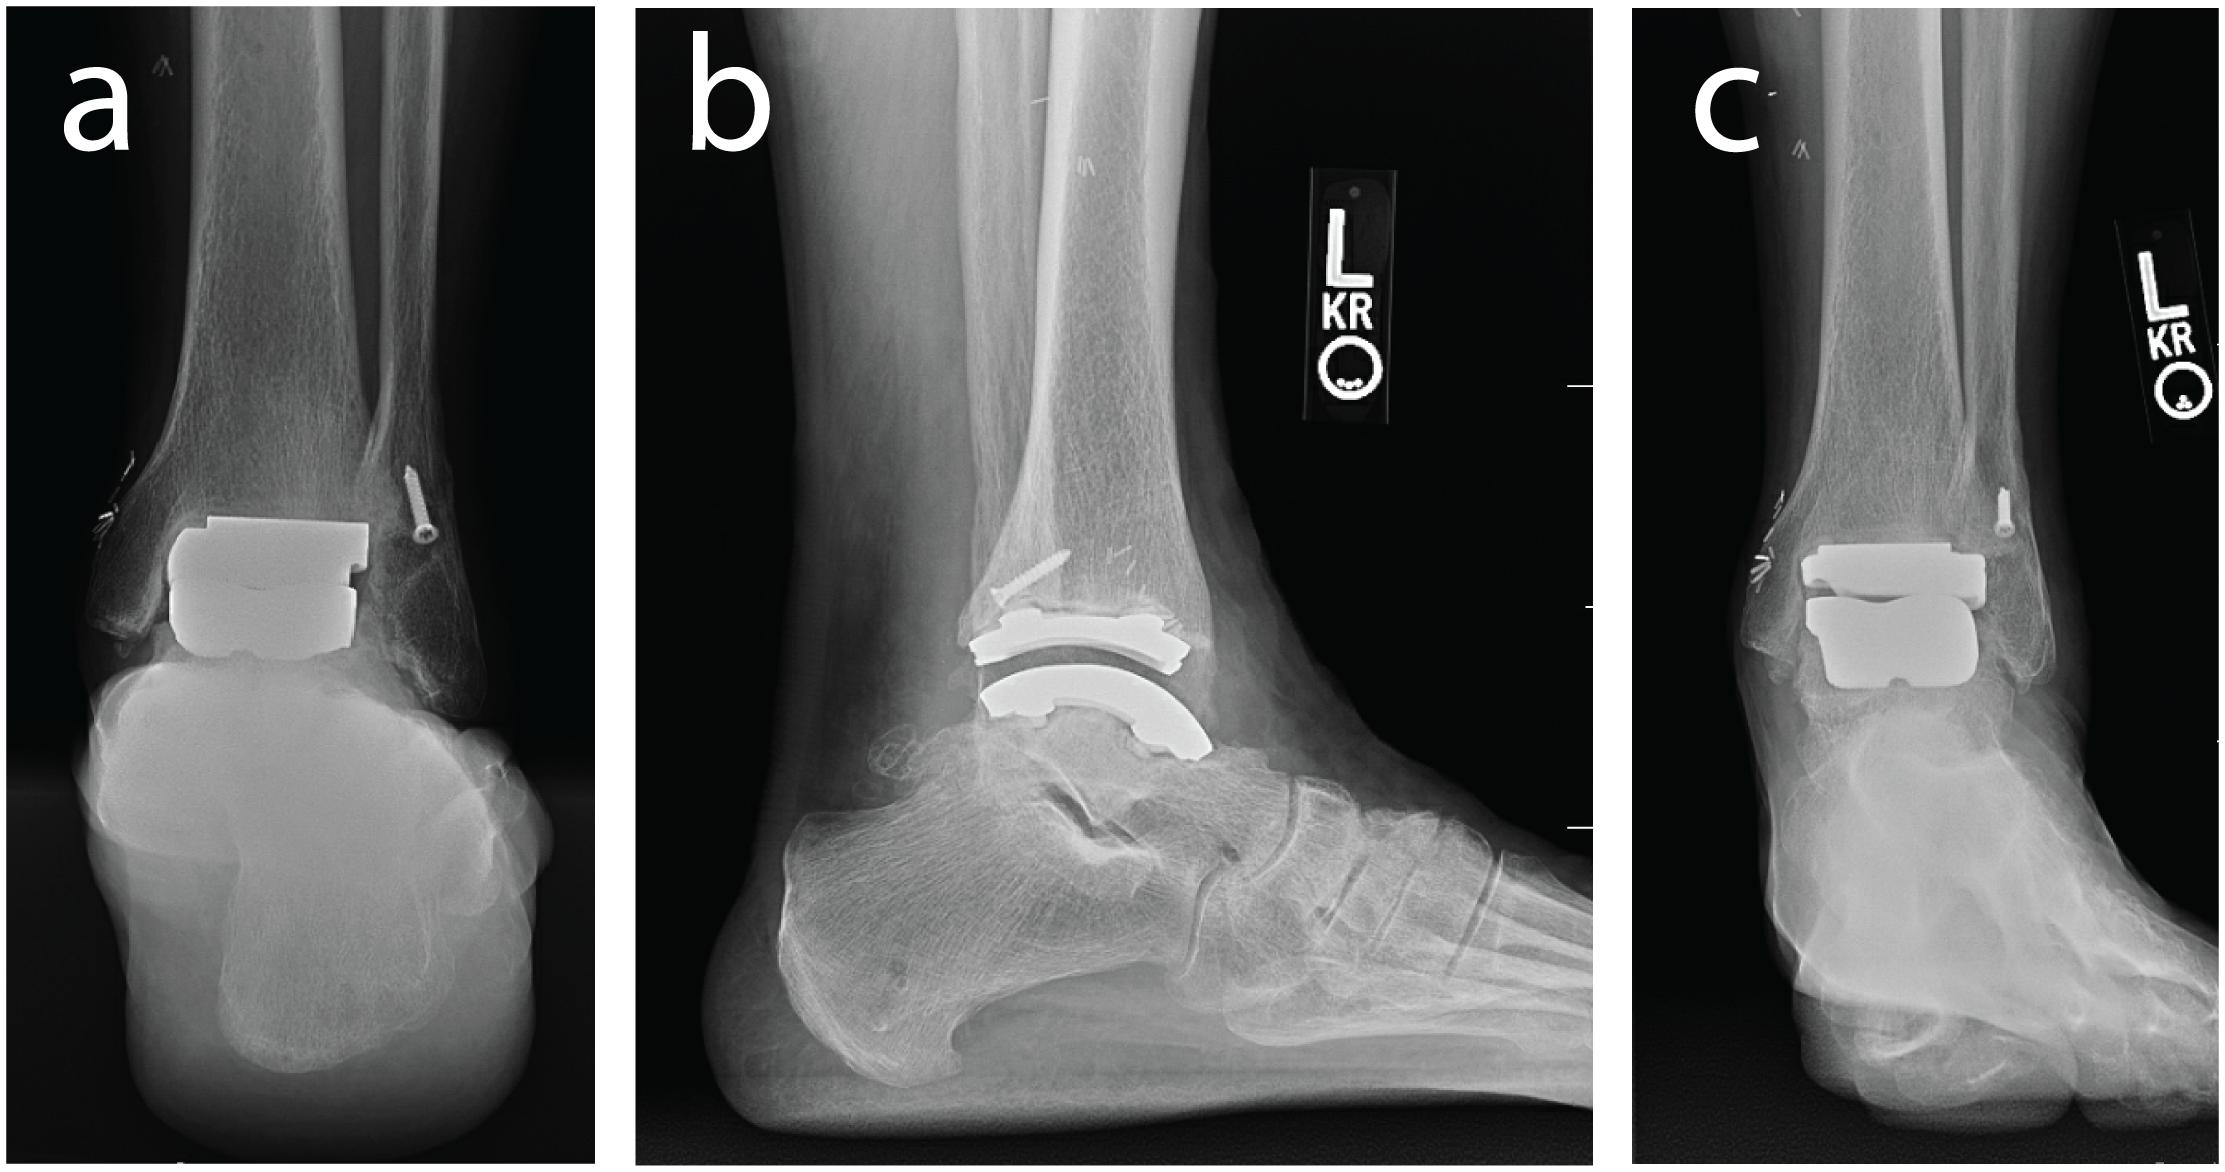 Distance mapping and volumetric assessment of the ankle and